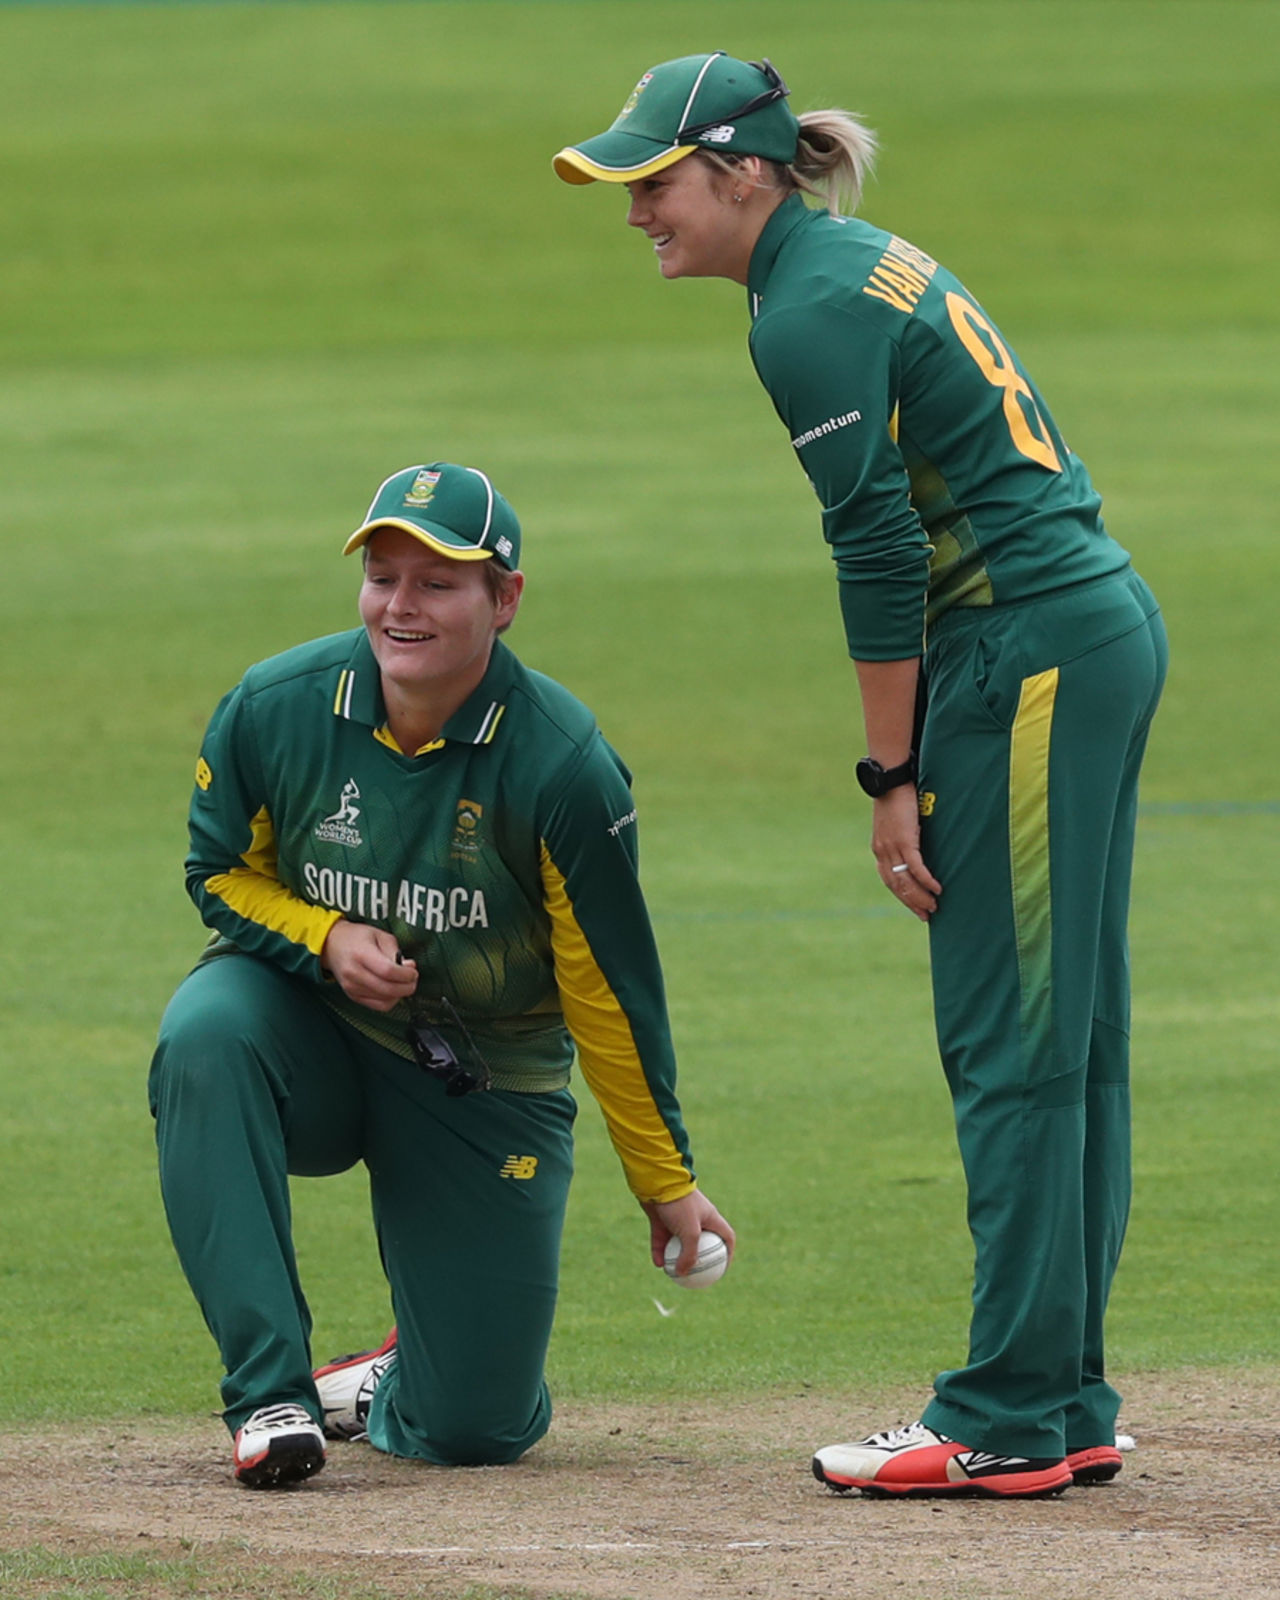 Dane van Niekerk and Lizelle Lee have a laugh after the latter took a few tumbles at point, South Africa Women v Sri Lanka Women, Women's World Cup, Taunton, July 12, 2017